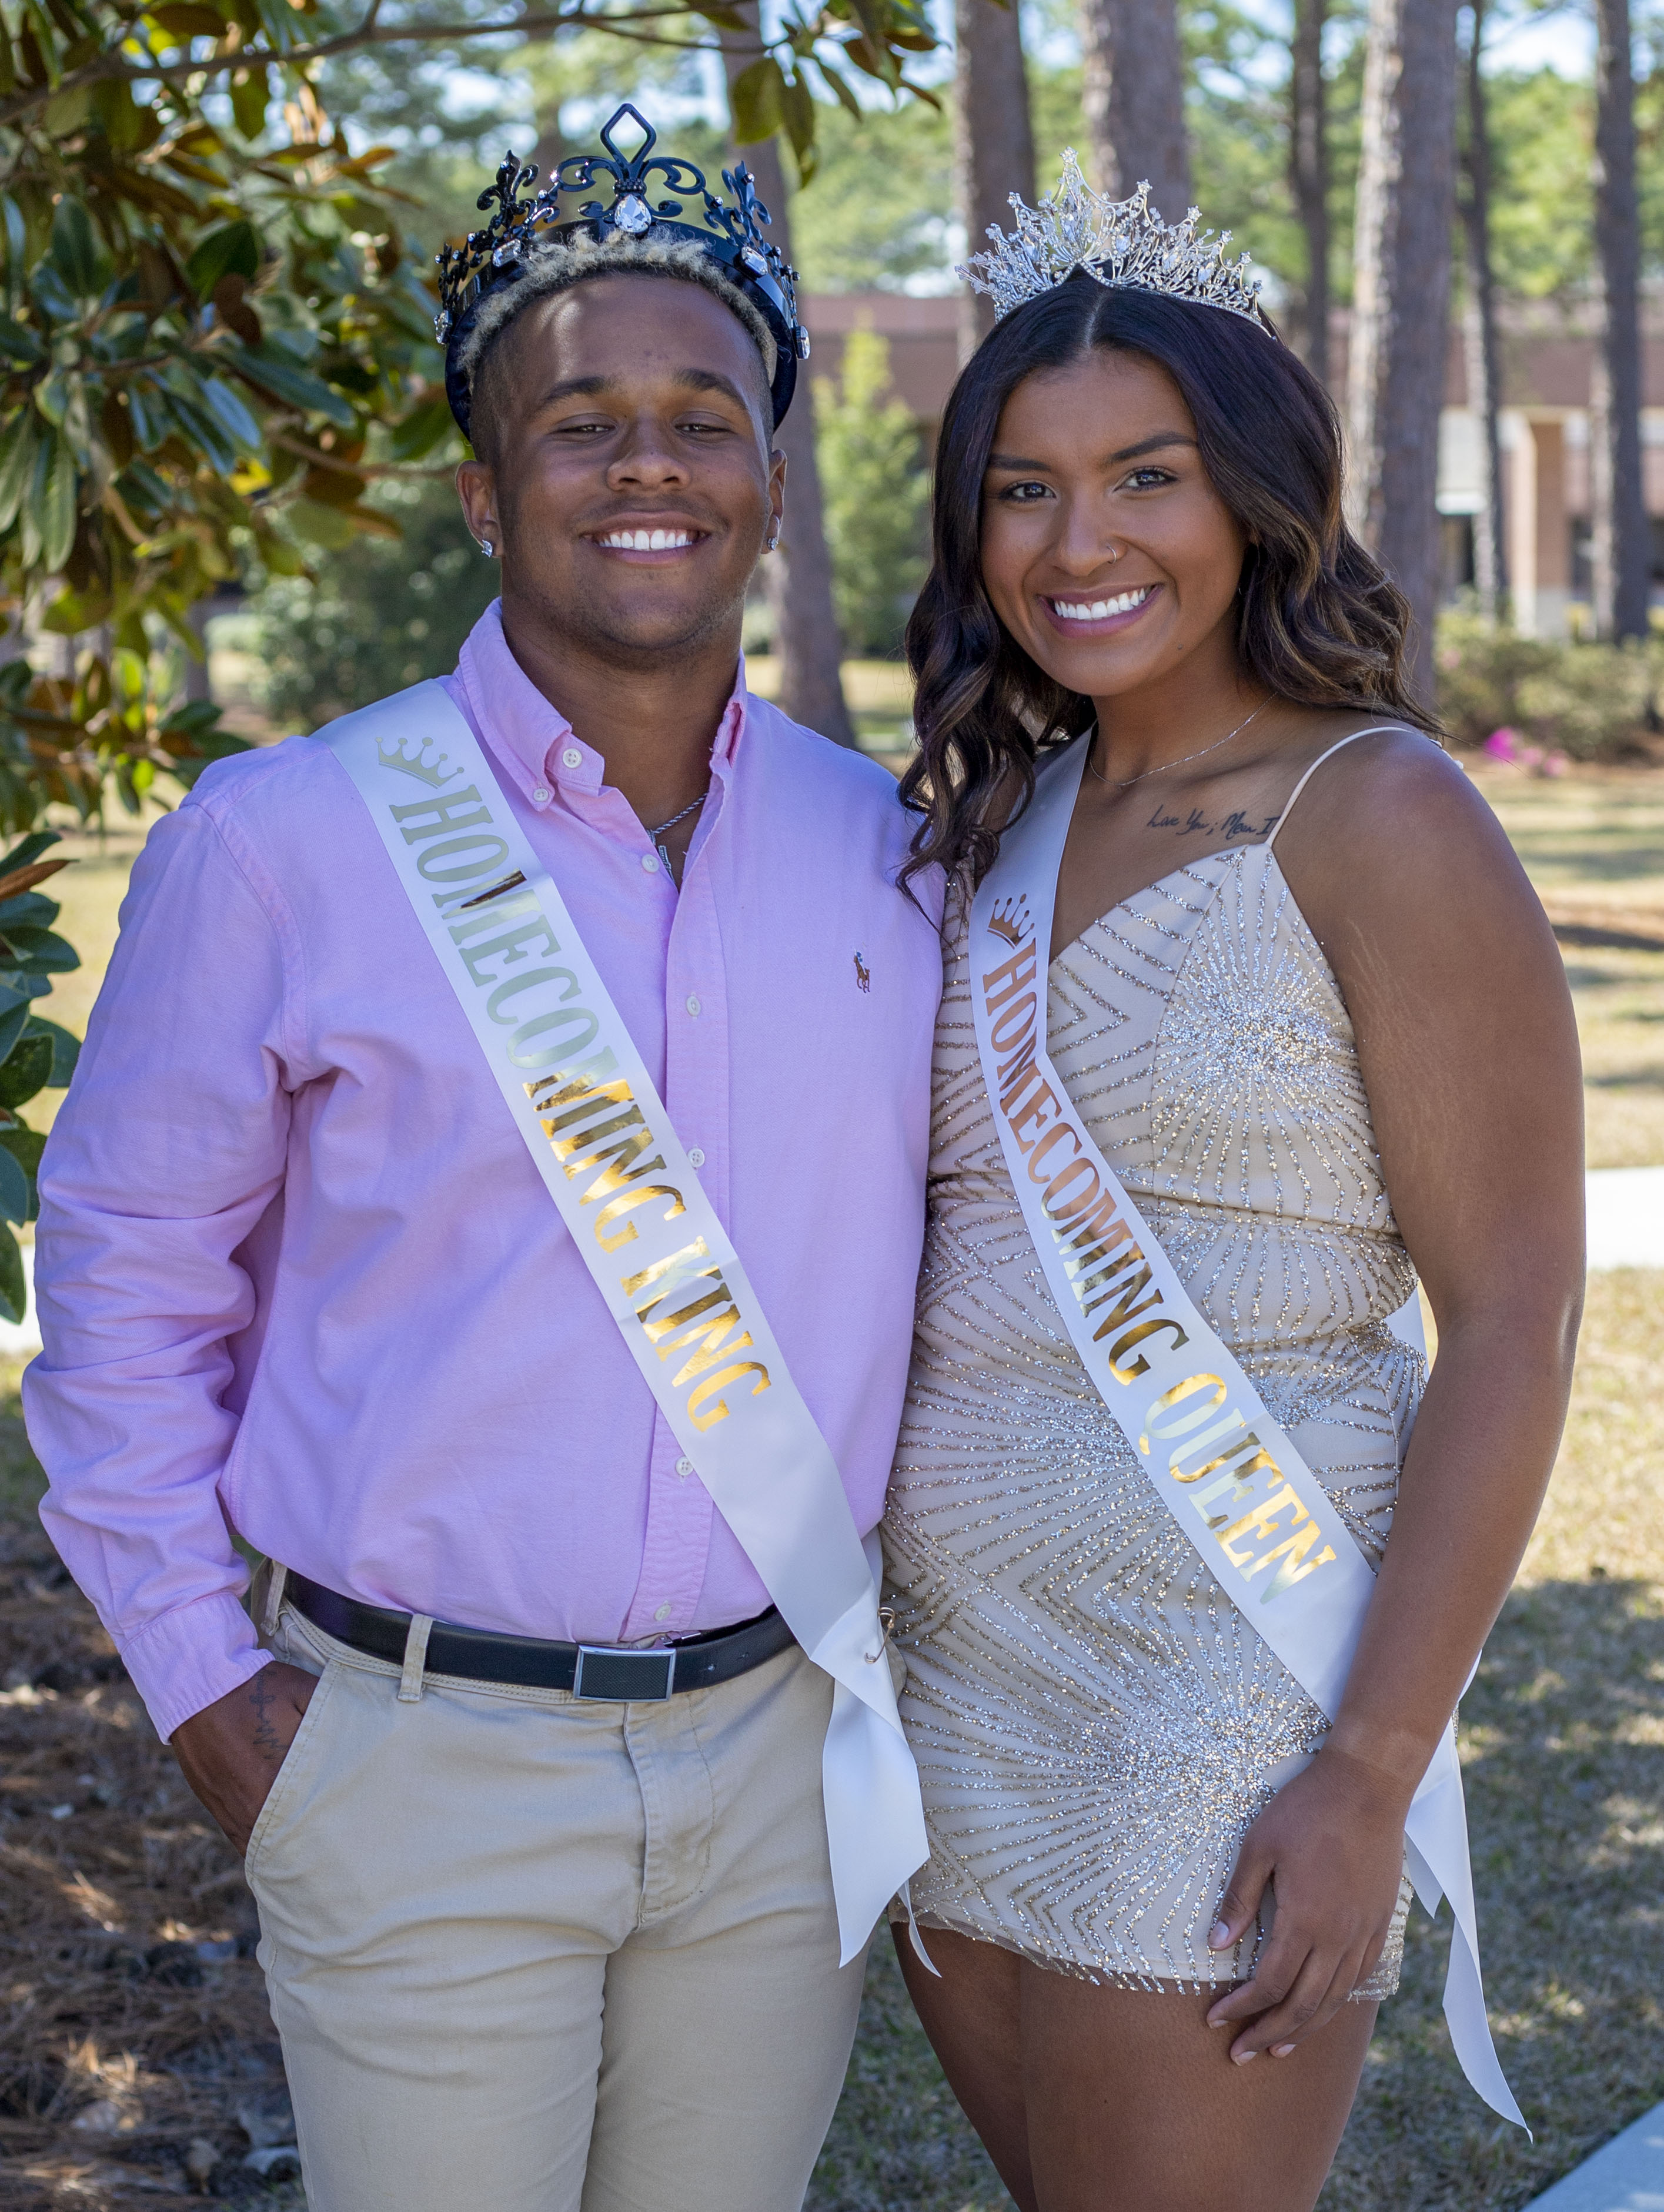 Meeting our Homecoming King and Queen – News from the Nest